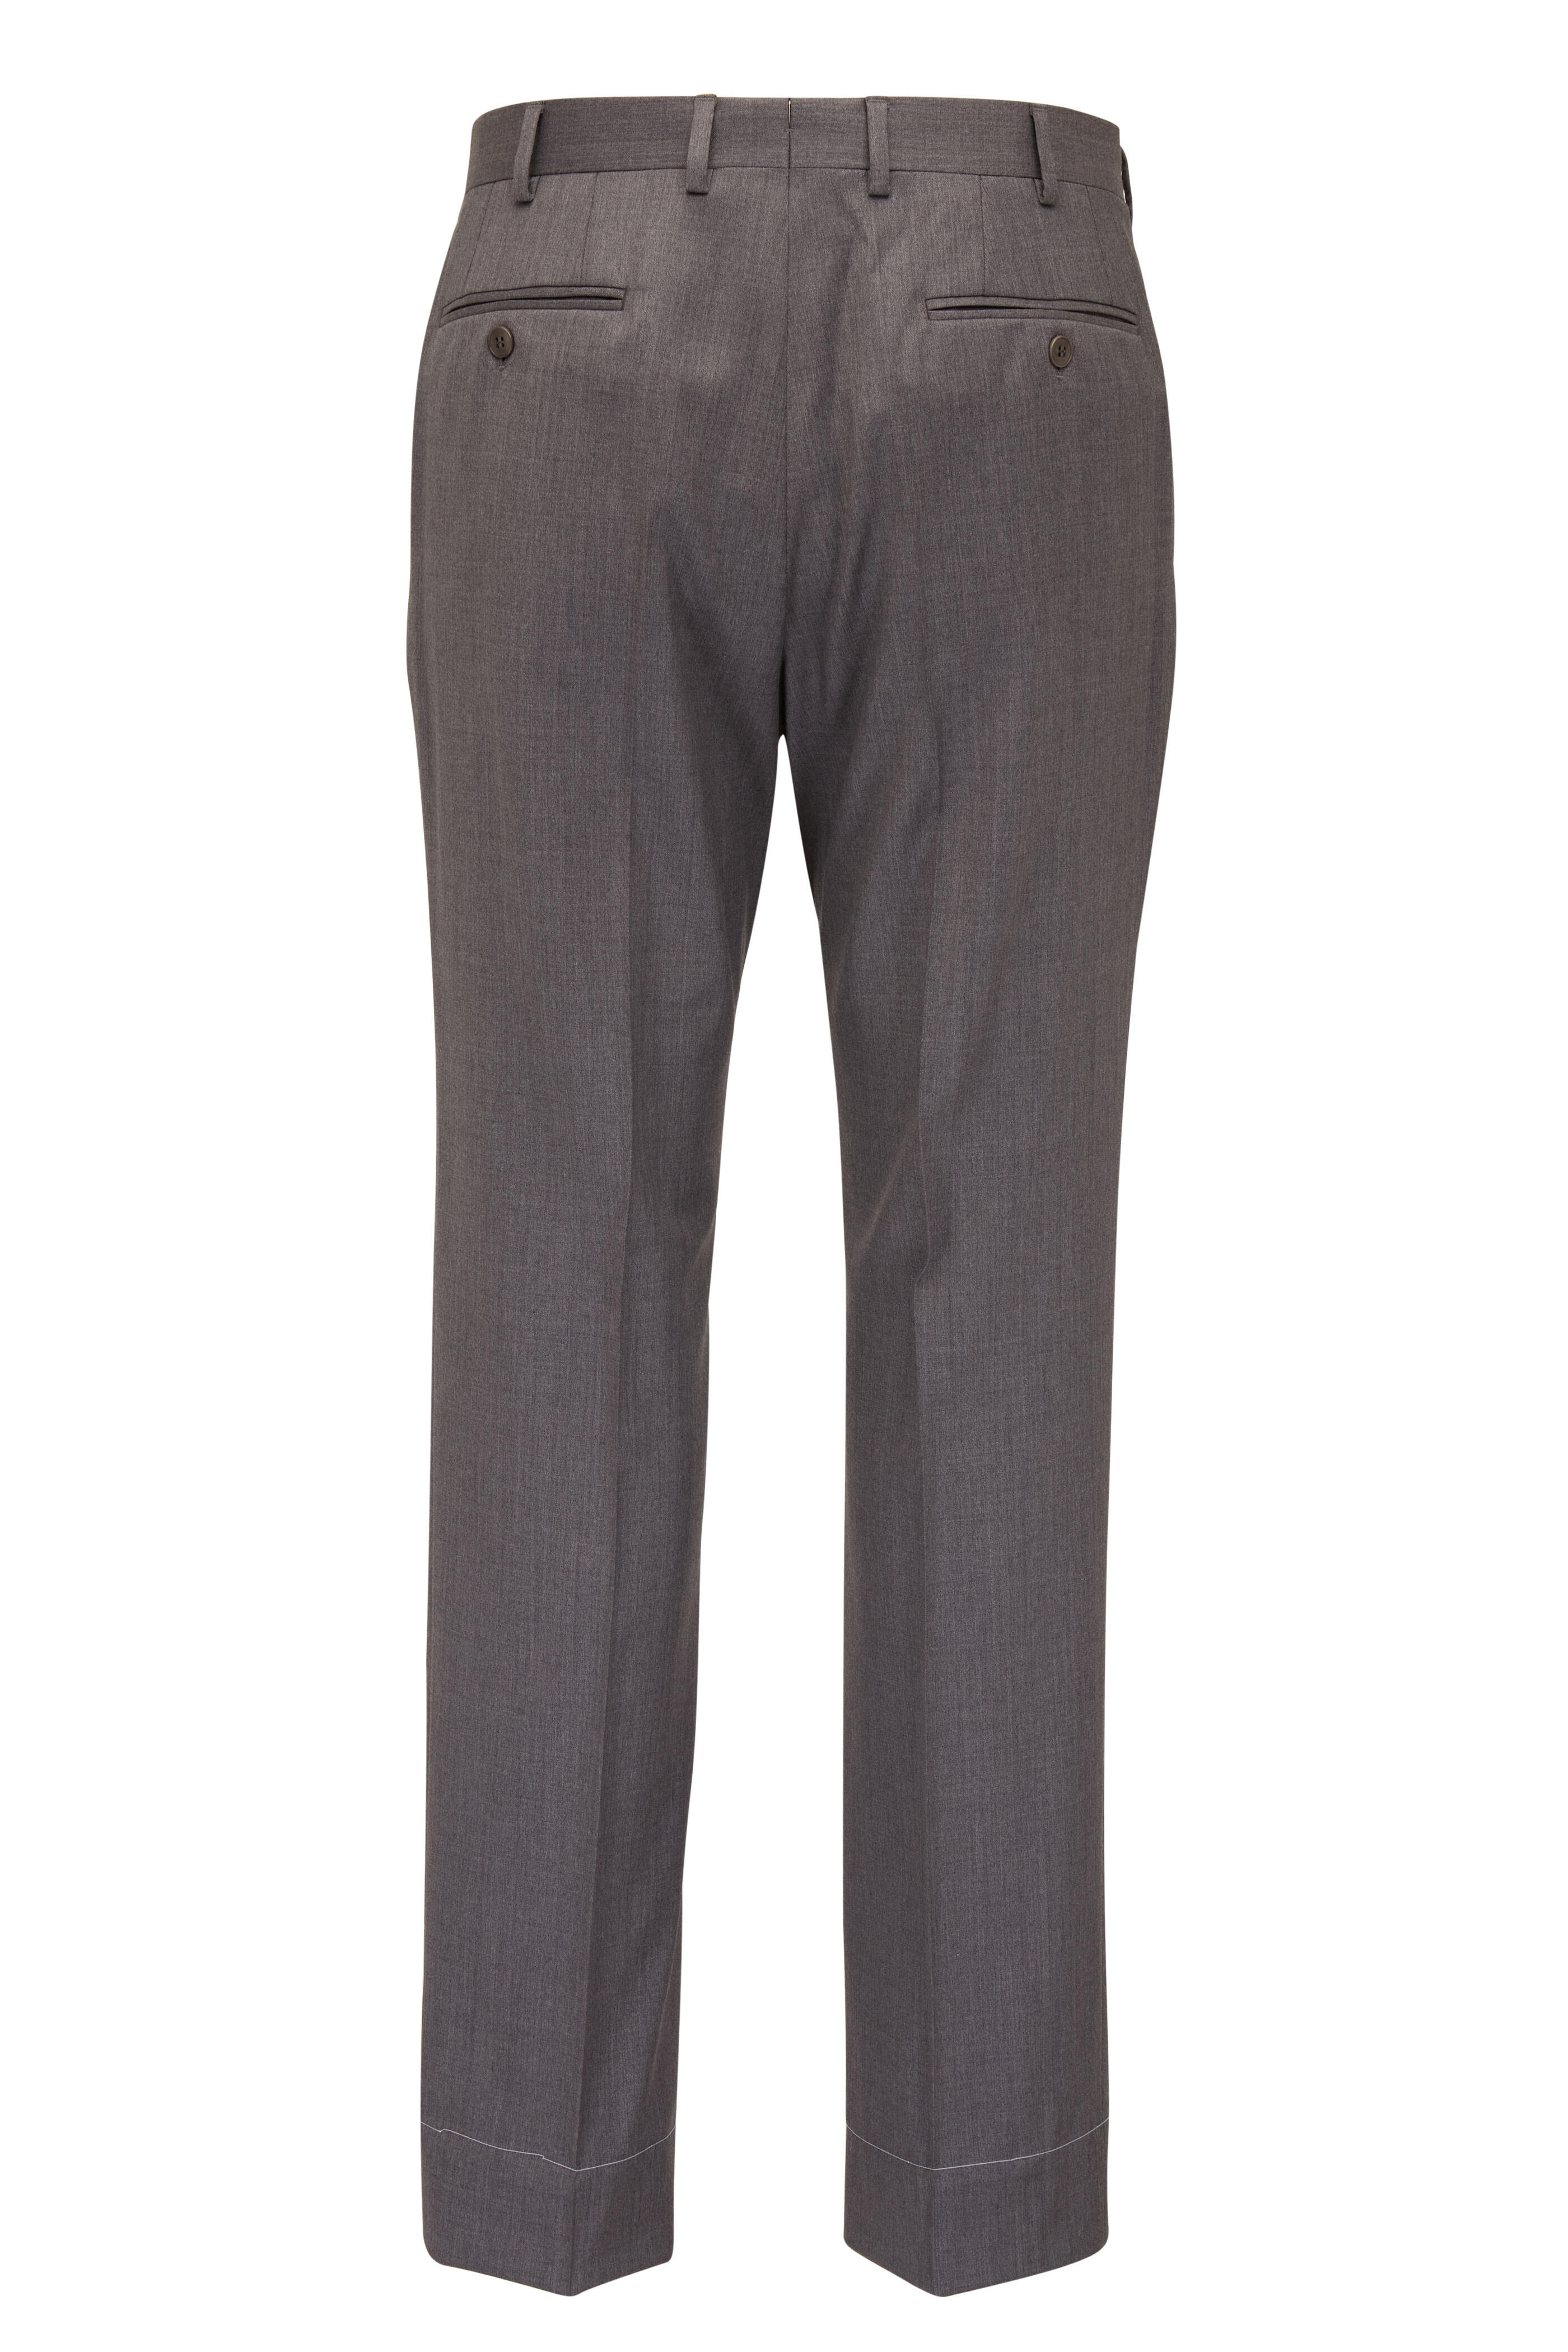 Brioni - Solid Gray Dress Pant | Mitchell Stores